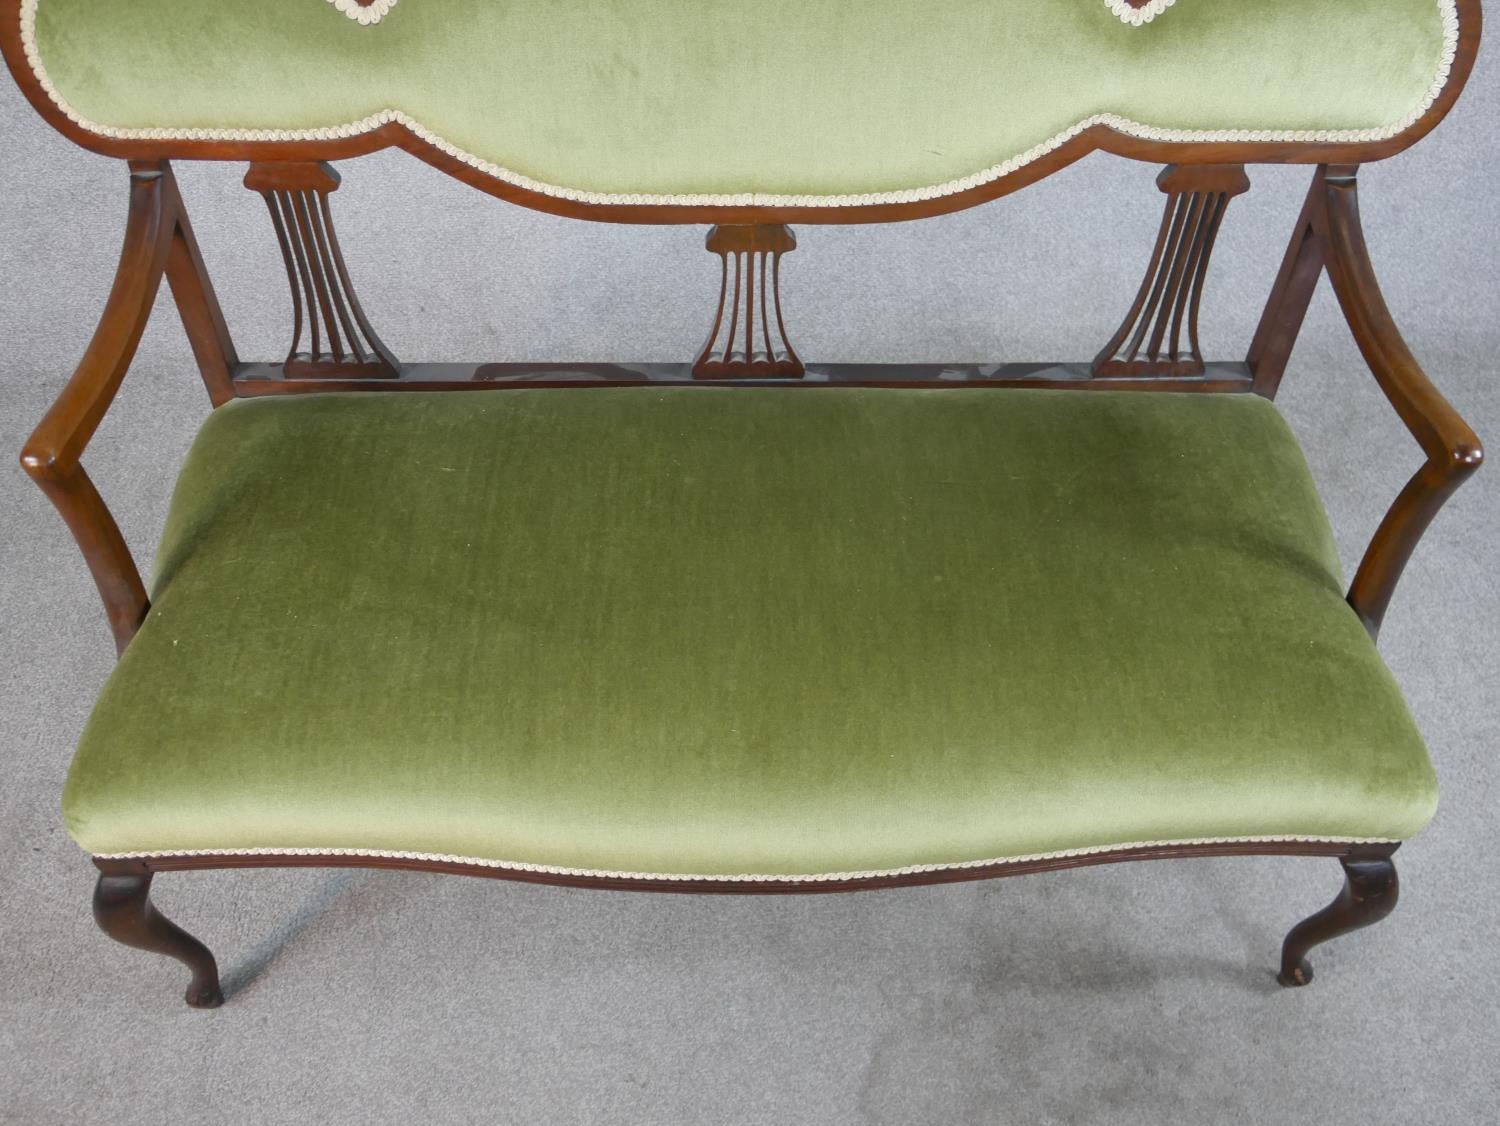 An Edwardian mahogany framed open arm settee with pierced splat back, with green upholstered seat - Image 2 of 7